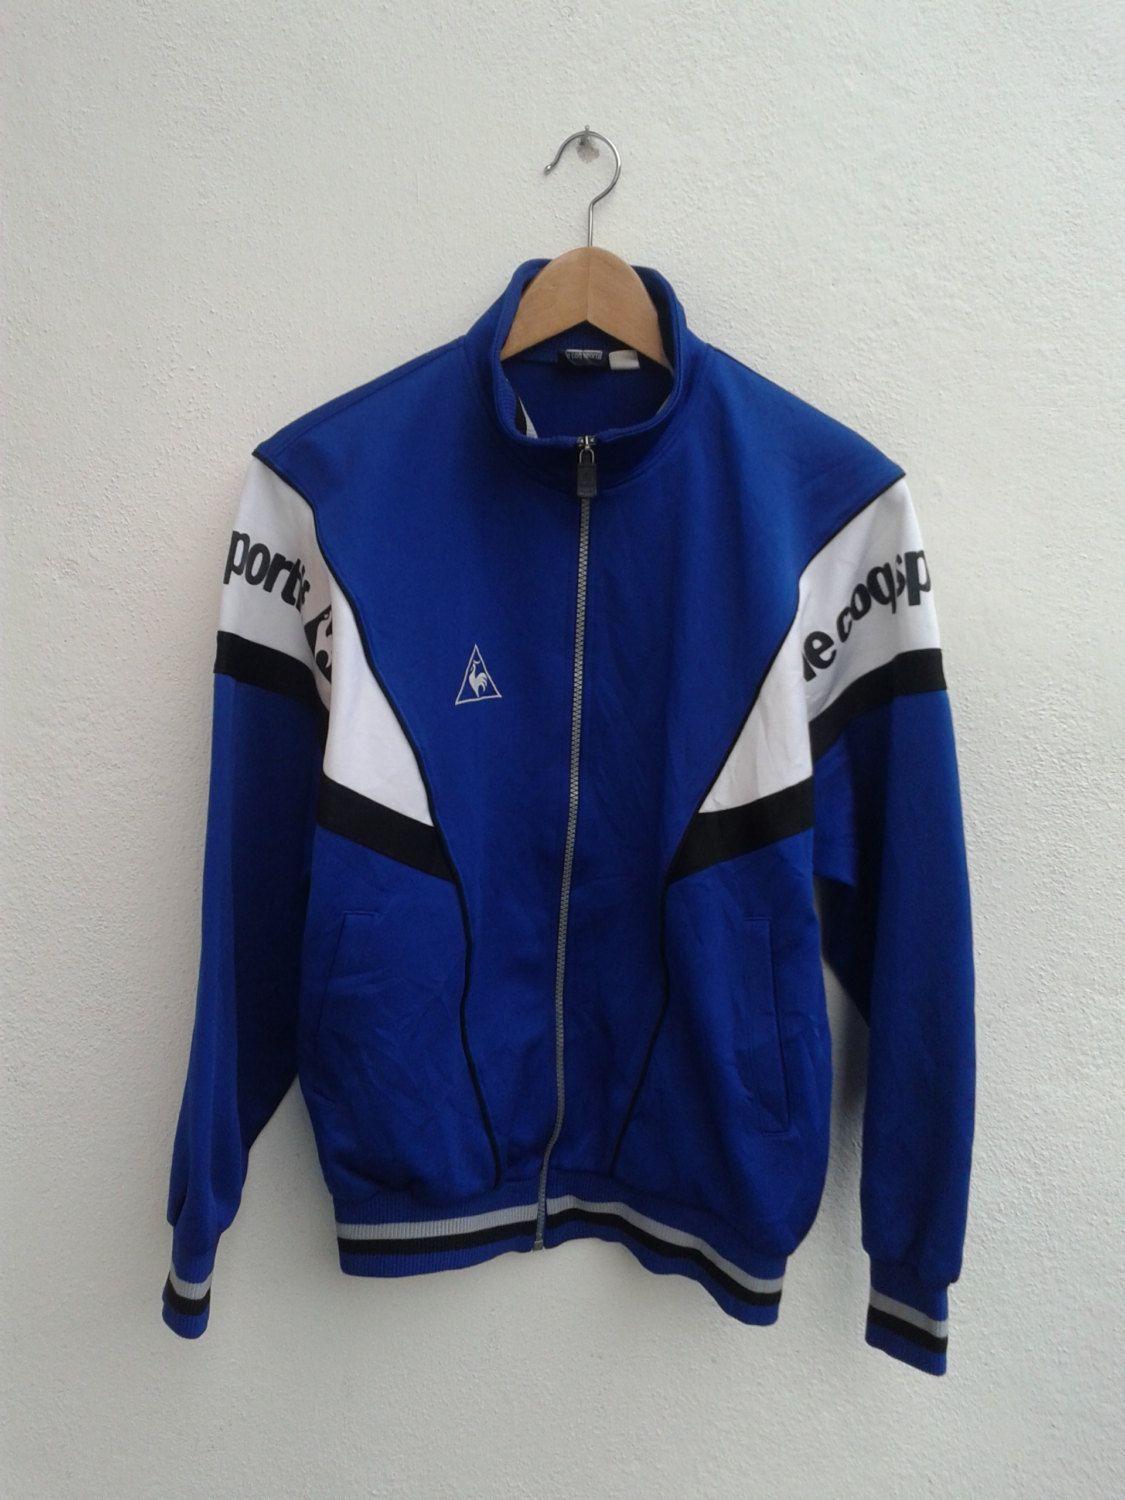 Triangle with Rooster Logo - LE Coq Sportif Track And Feild Sportswear Jacket Vintage 90s Rooster